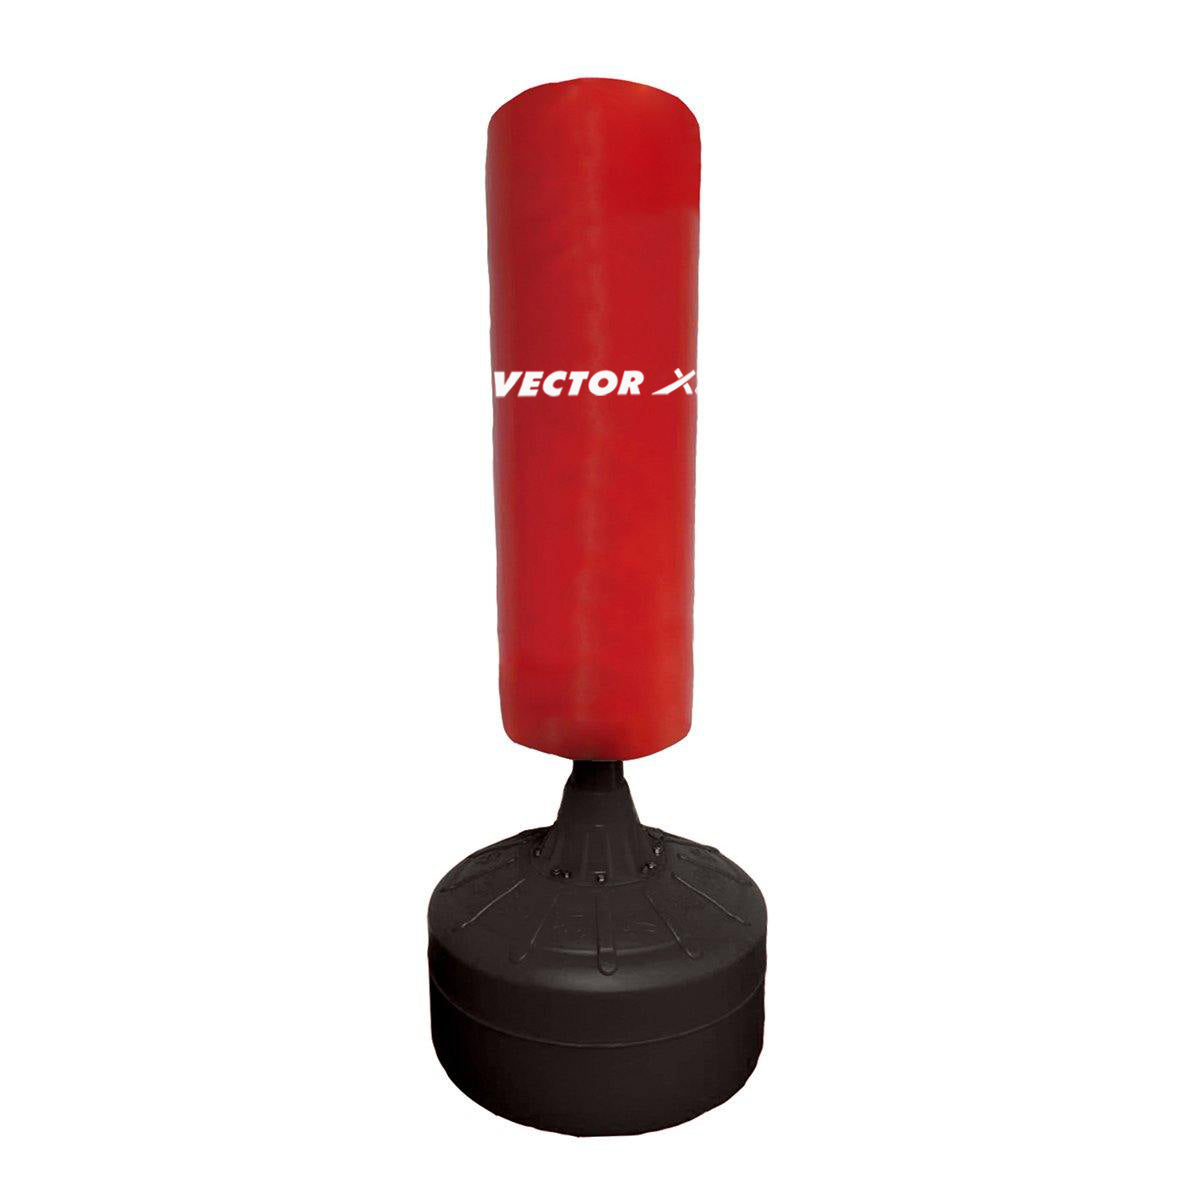 Vector X Fitness BT-250 Professional Boxing Trainer Punching Bag - Best Price online Prokicksports.com